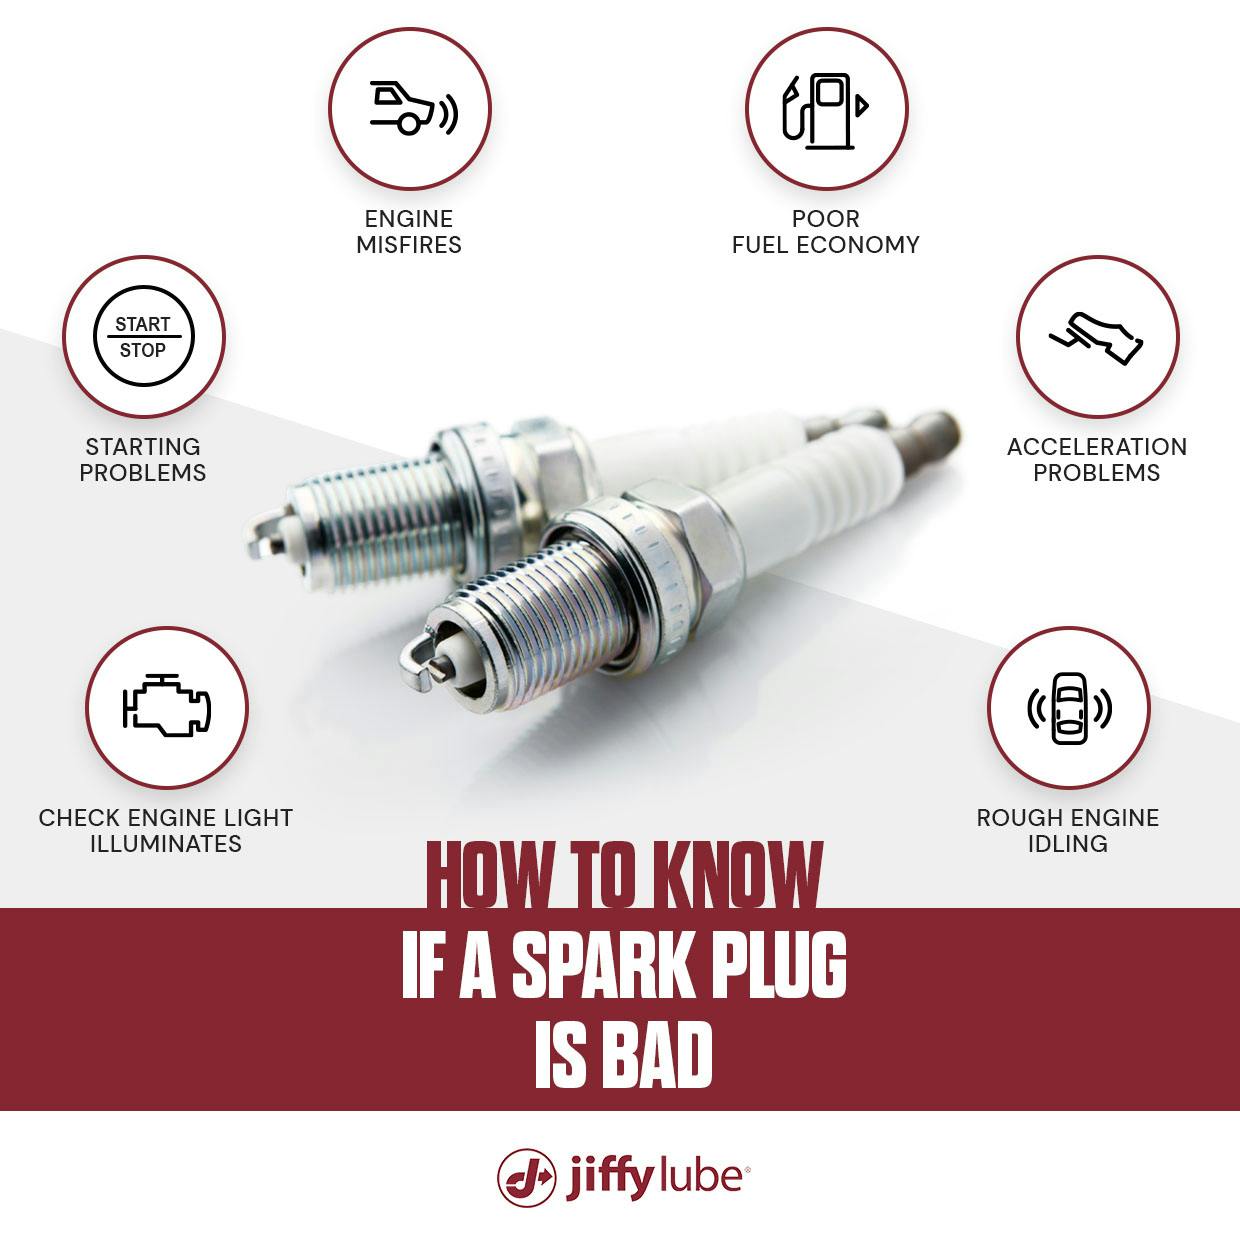 How to know if a spark plug is bad visual